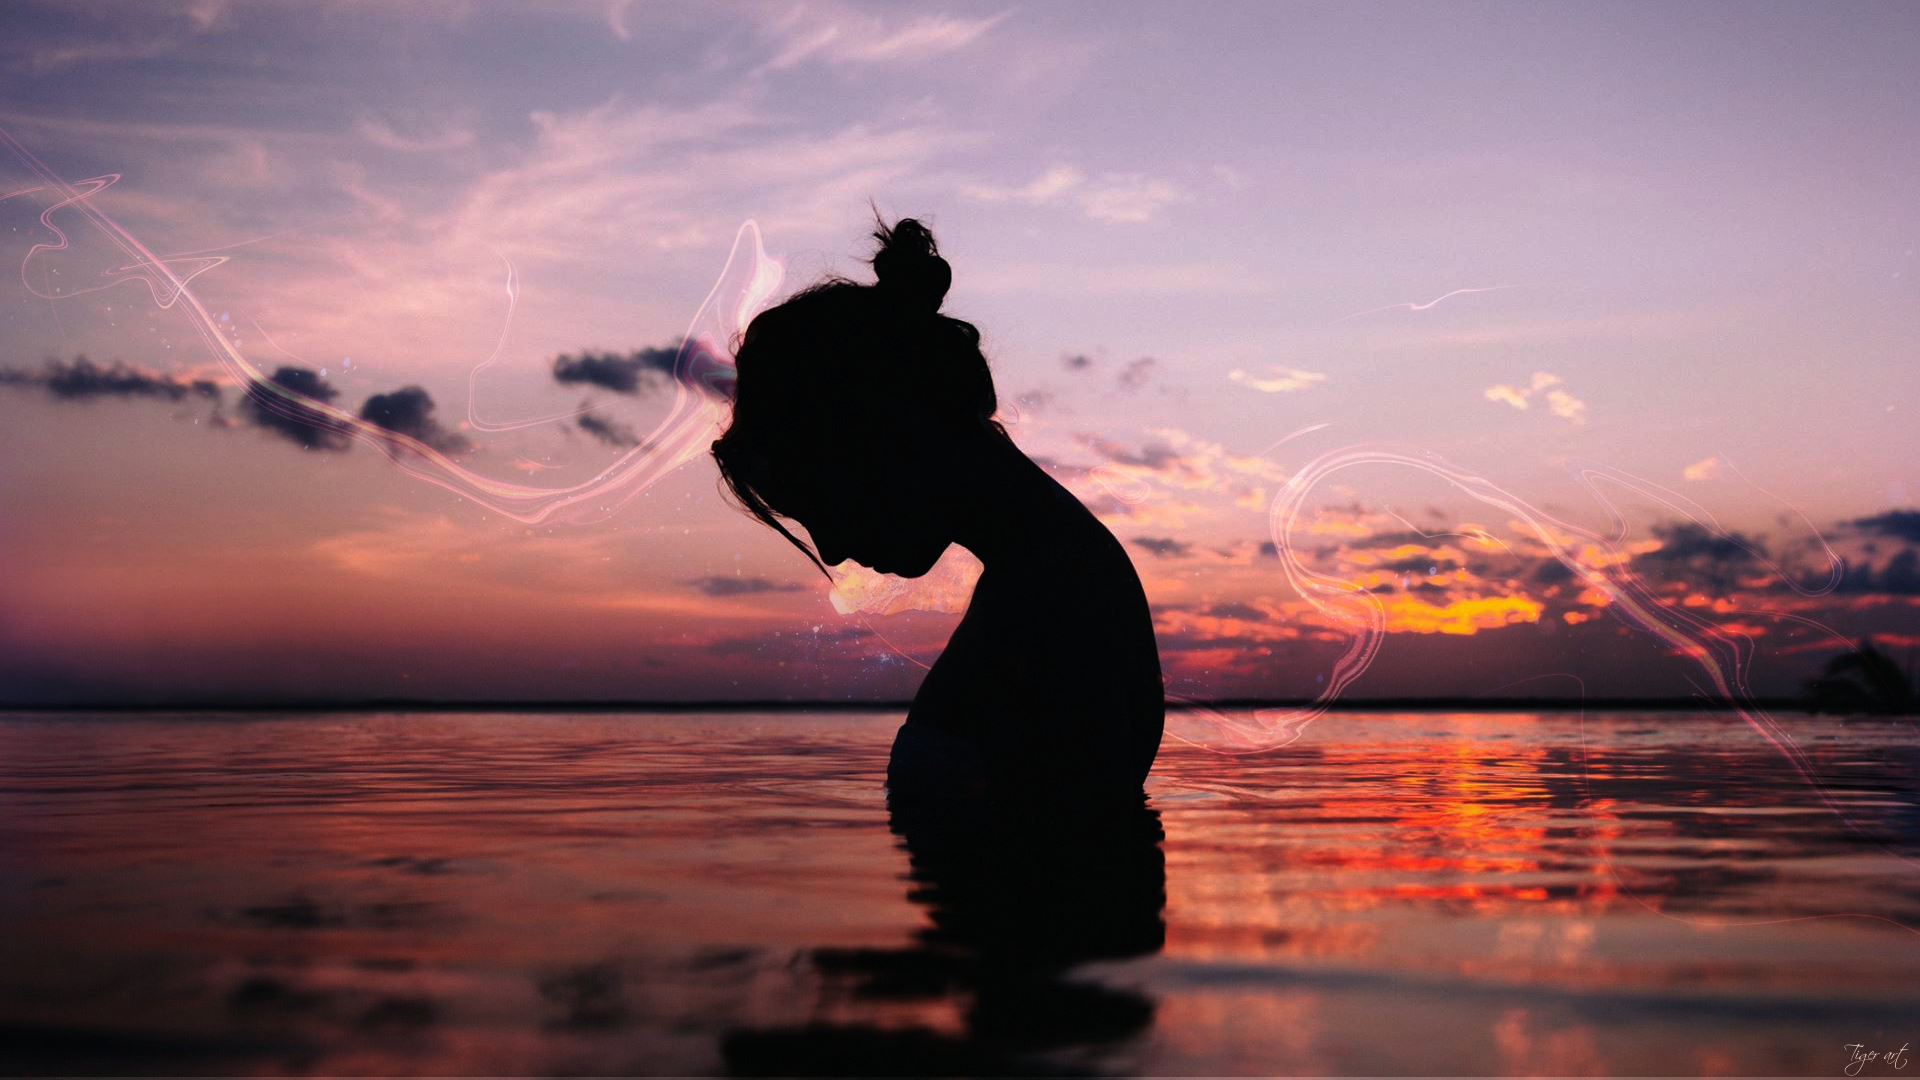 People 1920x1080 women Pacific Ocean sunset silhouette Marissa Alves in water water sky nature women outdoors watermarked photoshopped low light